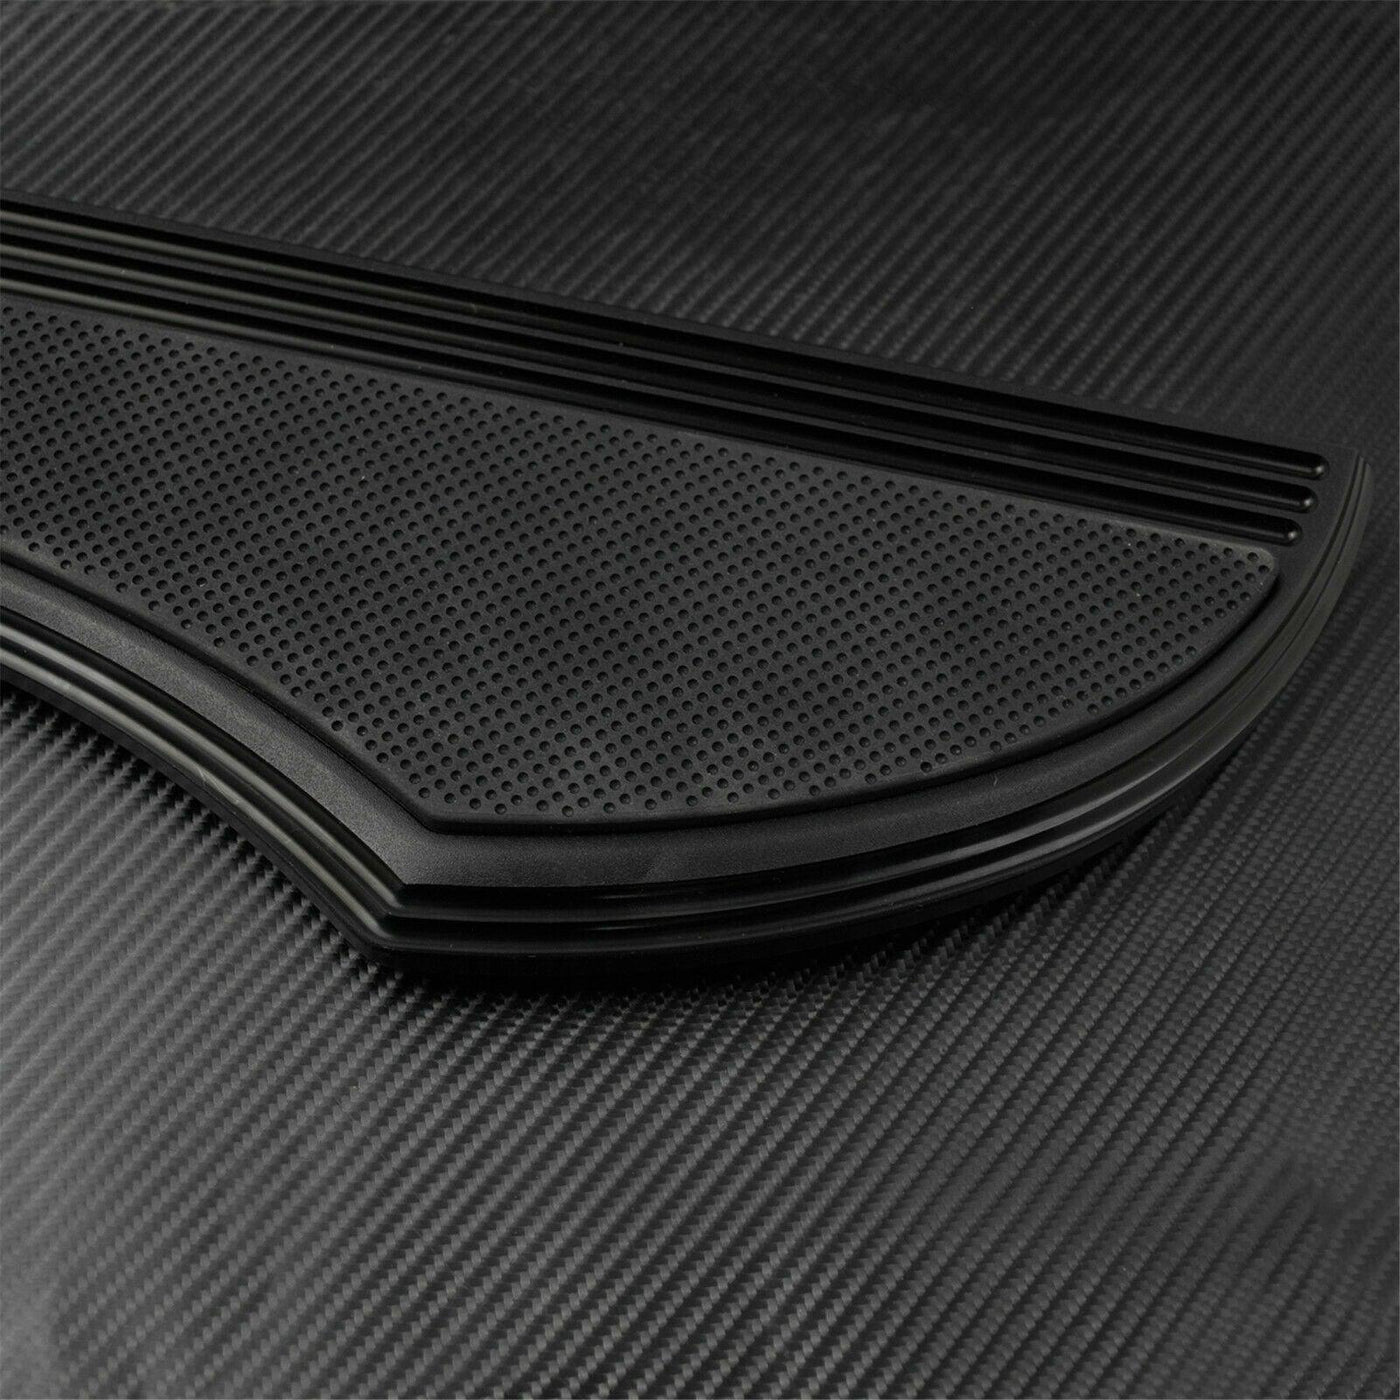 Driver Rider Footboard Floorboard Fit For Indian Chief Vintage Chieftain 2014-19 - Moto Life Products